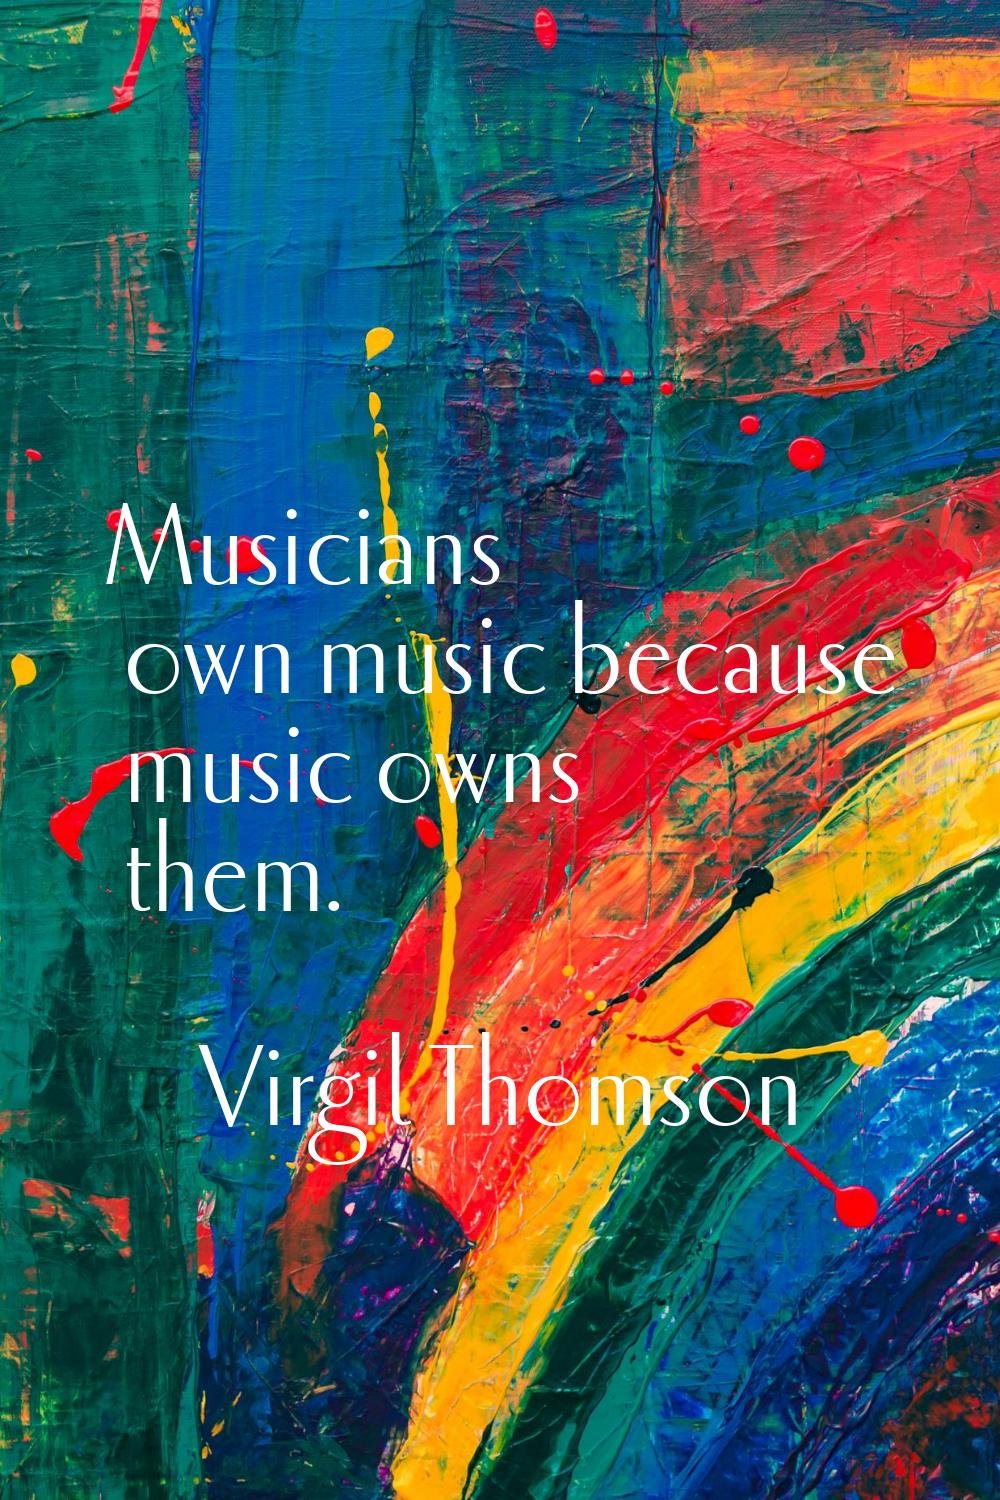 Musicians own music because music owns them.